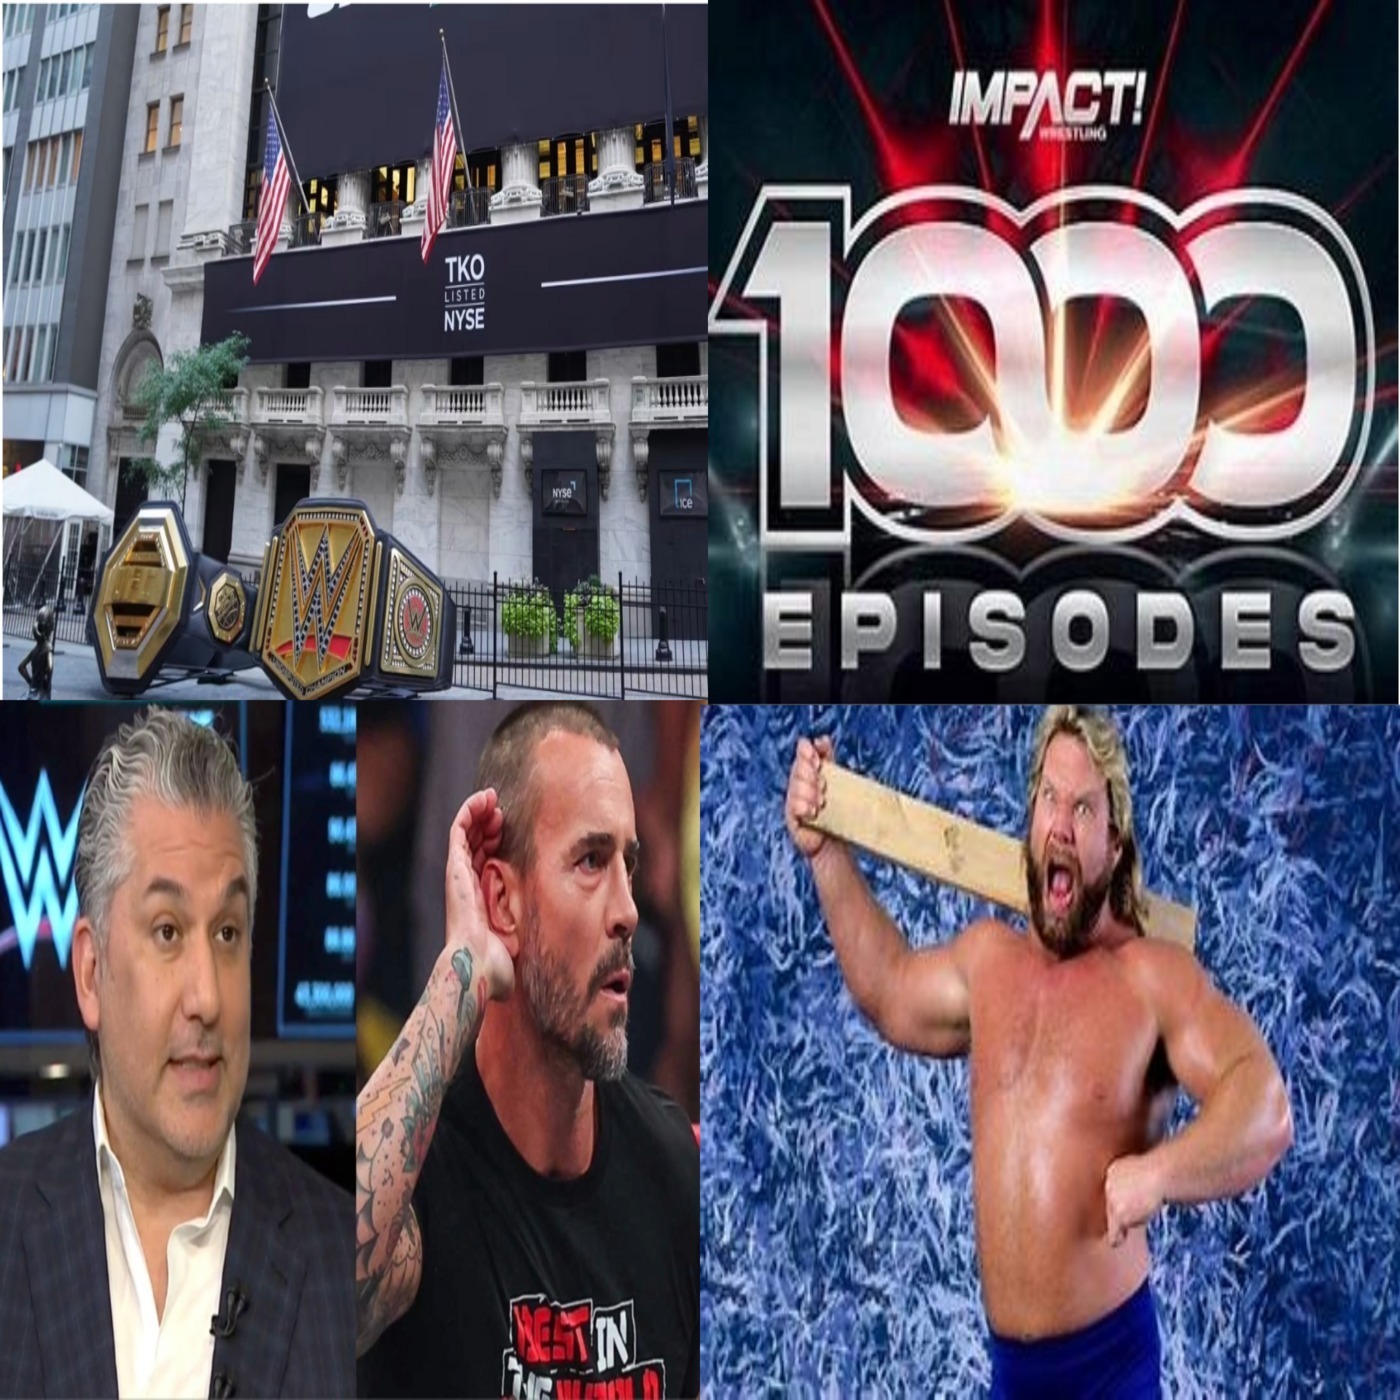 E153: WWE-UFC Merger Day! Nick Khan on CM Punk, IMPACT 1000 Spoilers & More, OH MY!